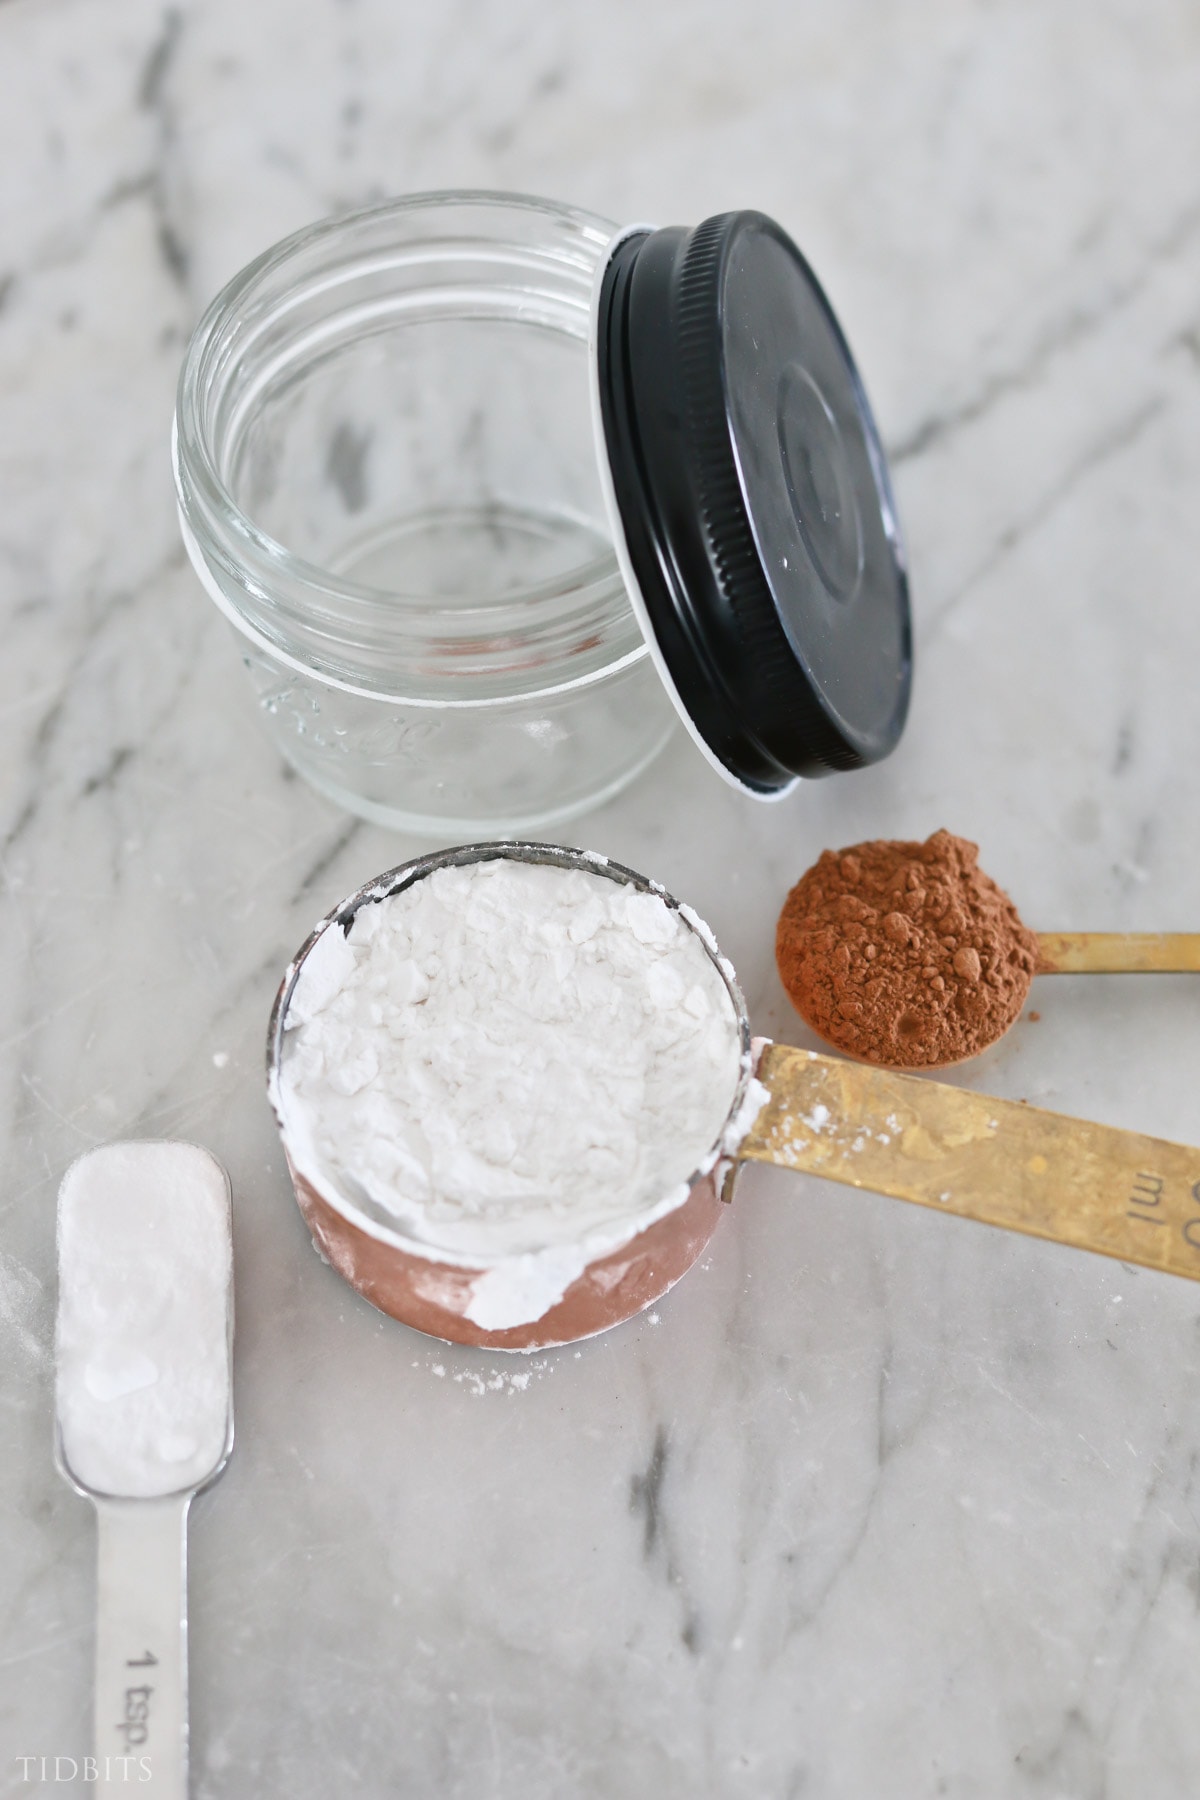 How to make dry shampoo with 3 natural ingredients